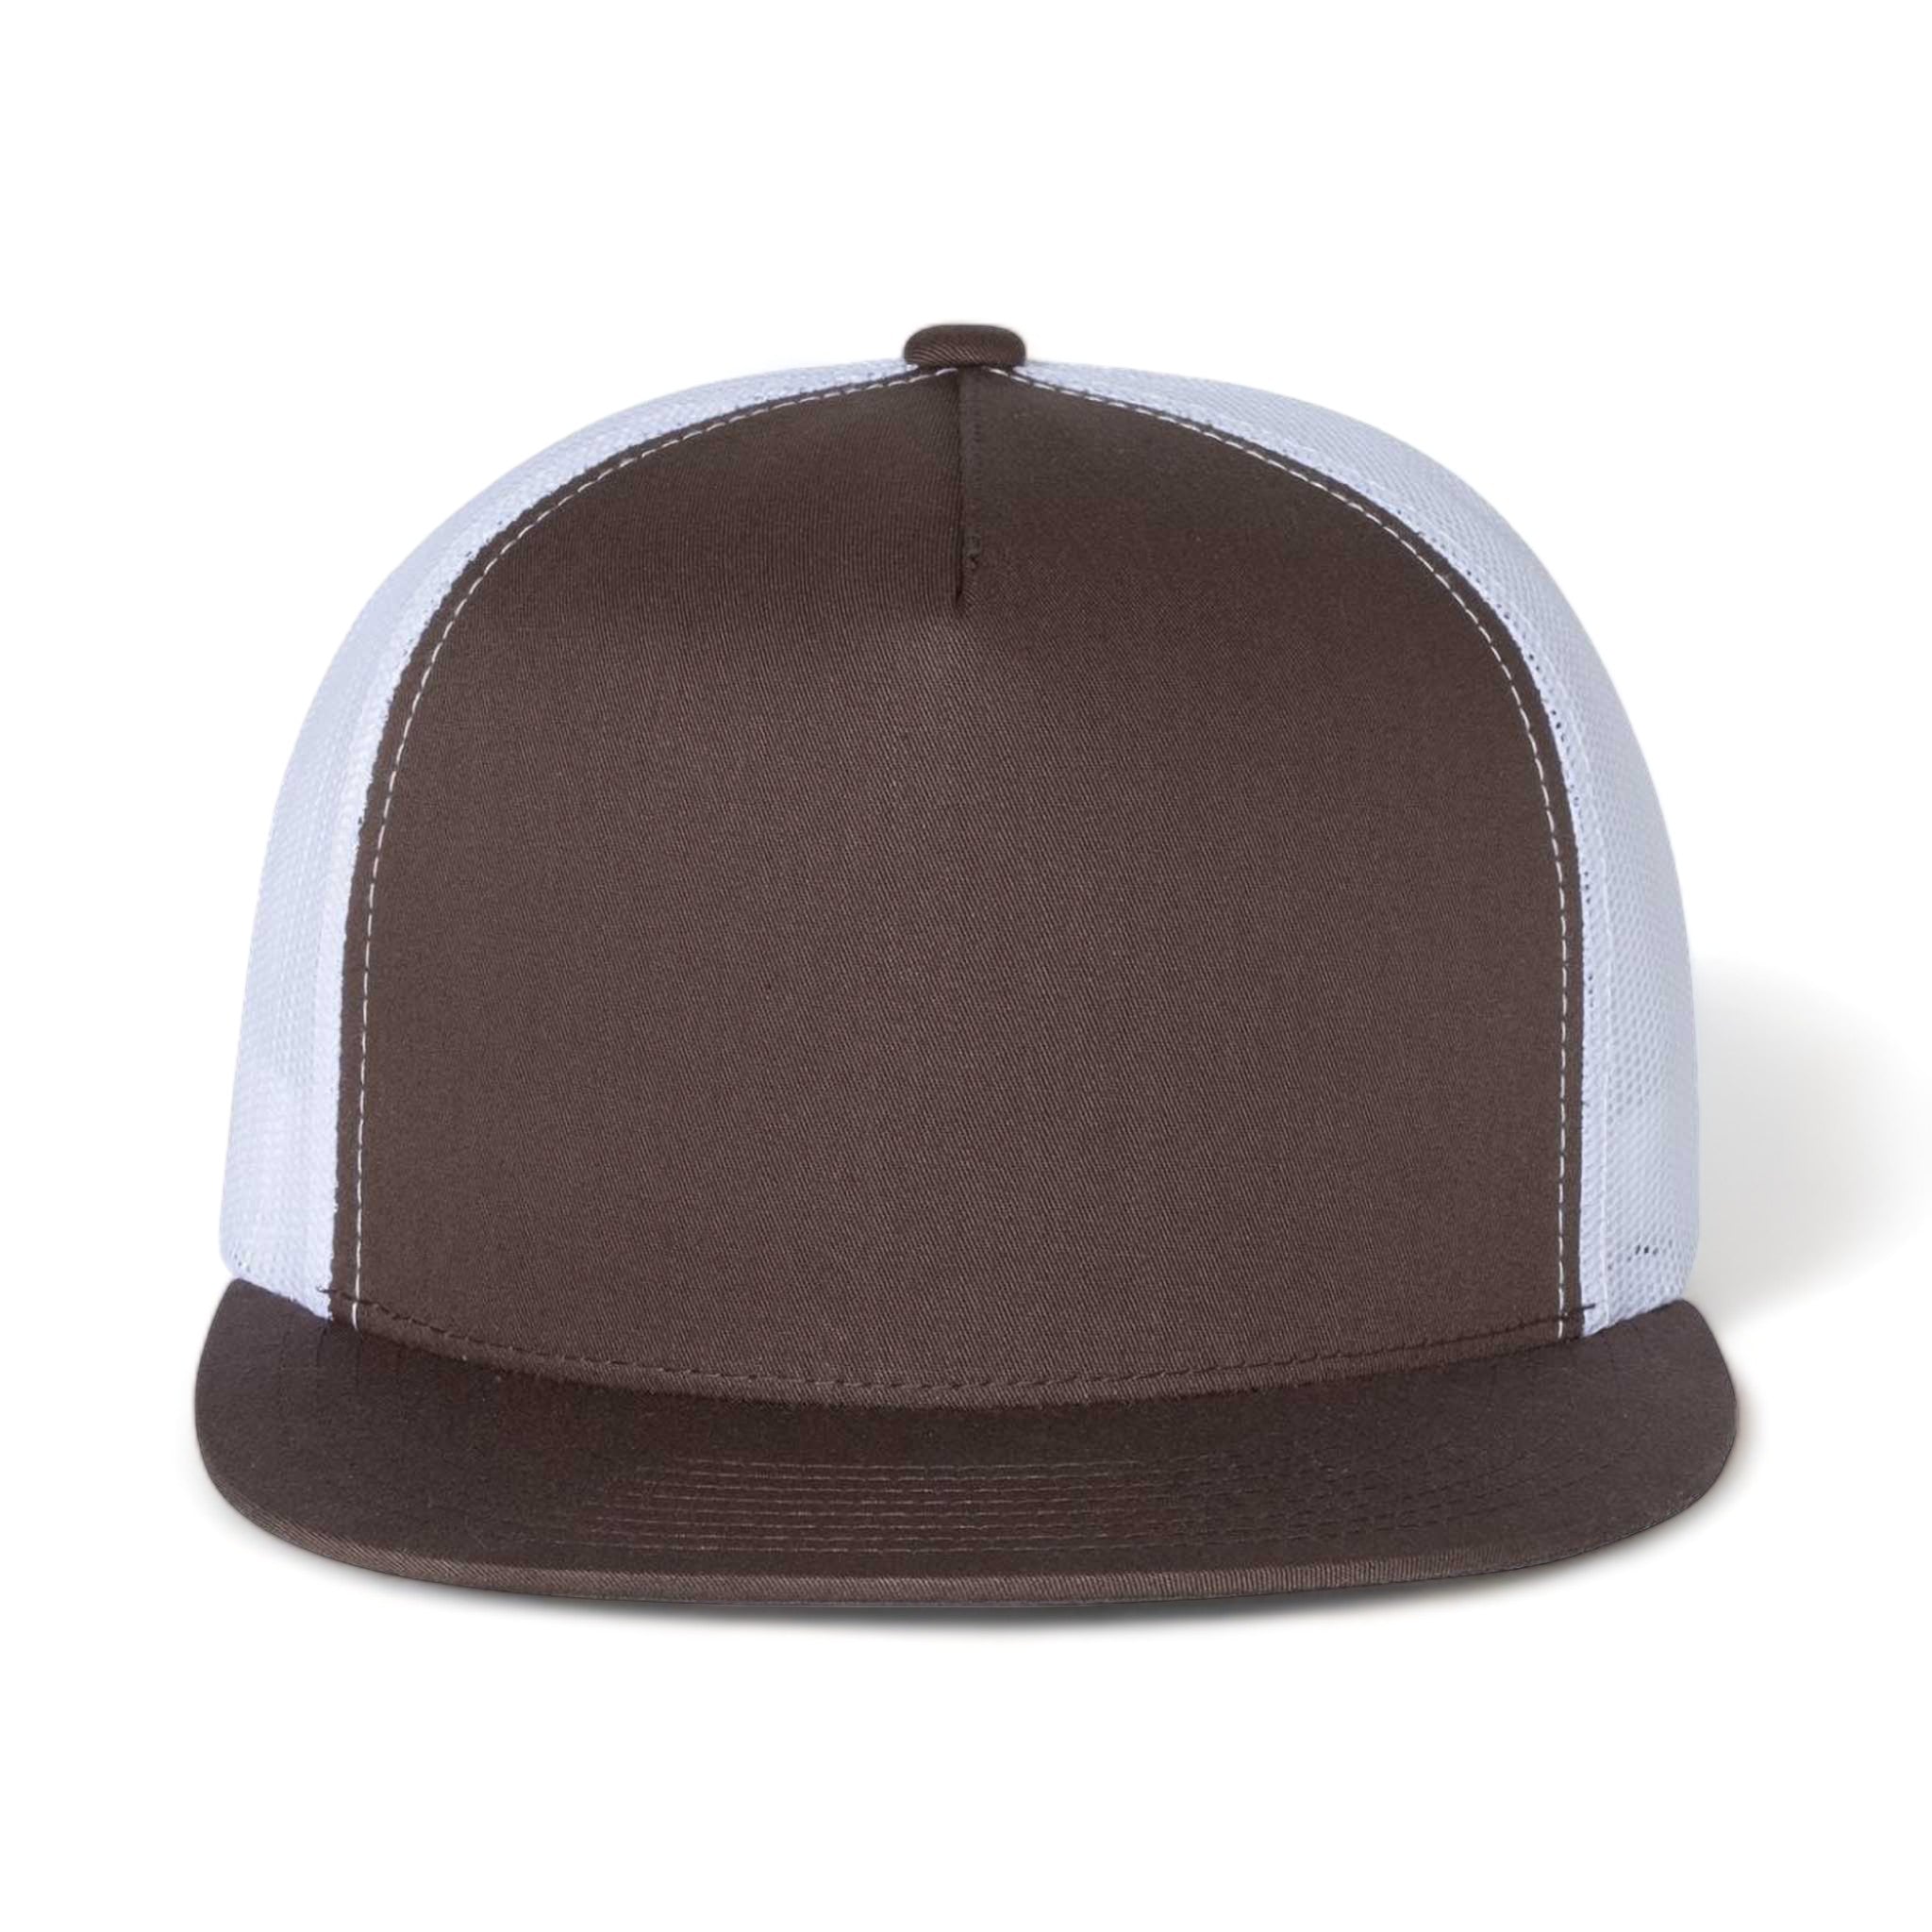 Front view of YP Classics 6006 custom hat in brown and white